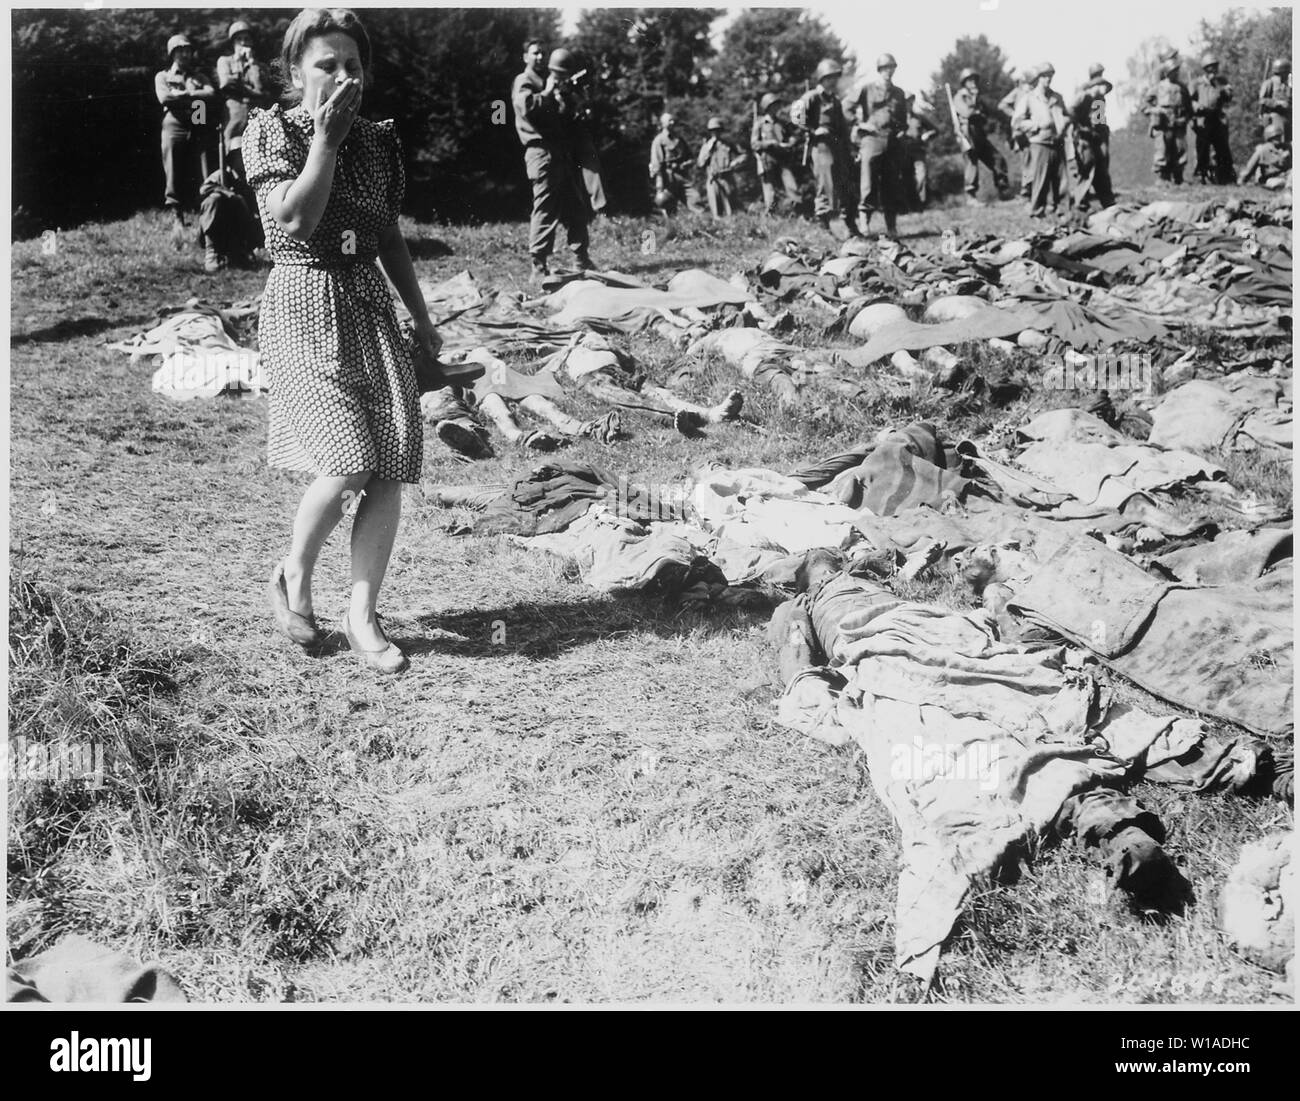 A German girl is overcome as she walks past the exhumed bodies of some of the 800 slave workers murdered by SS guards near Namering, Germany, and laid here so that townspeople may view the work of their Nazi leaders.; General notes:  Use War and Conflict Number 1124 when ordering a reproduction or requesting information about this image. Stock Photo